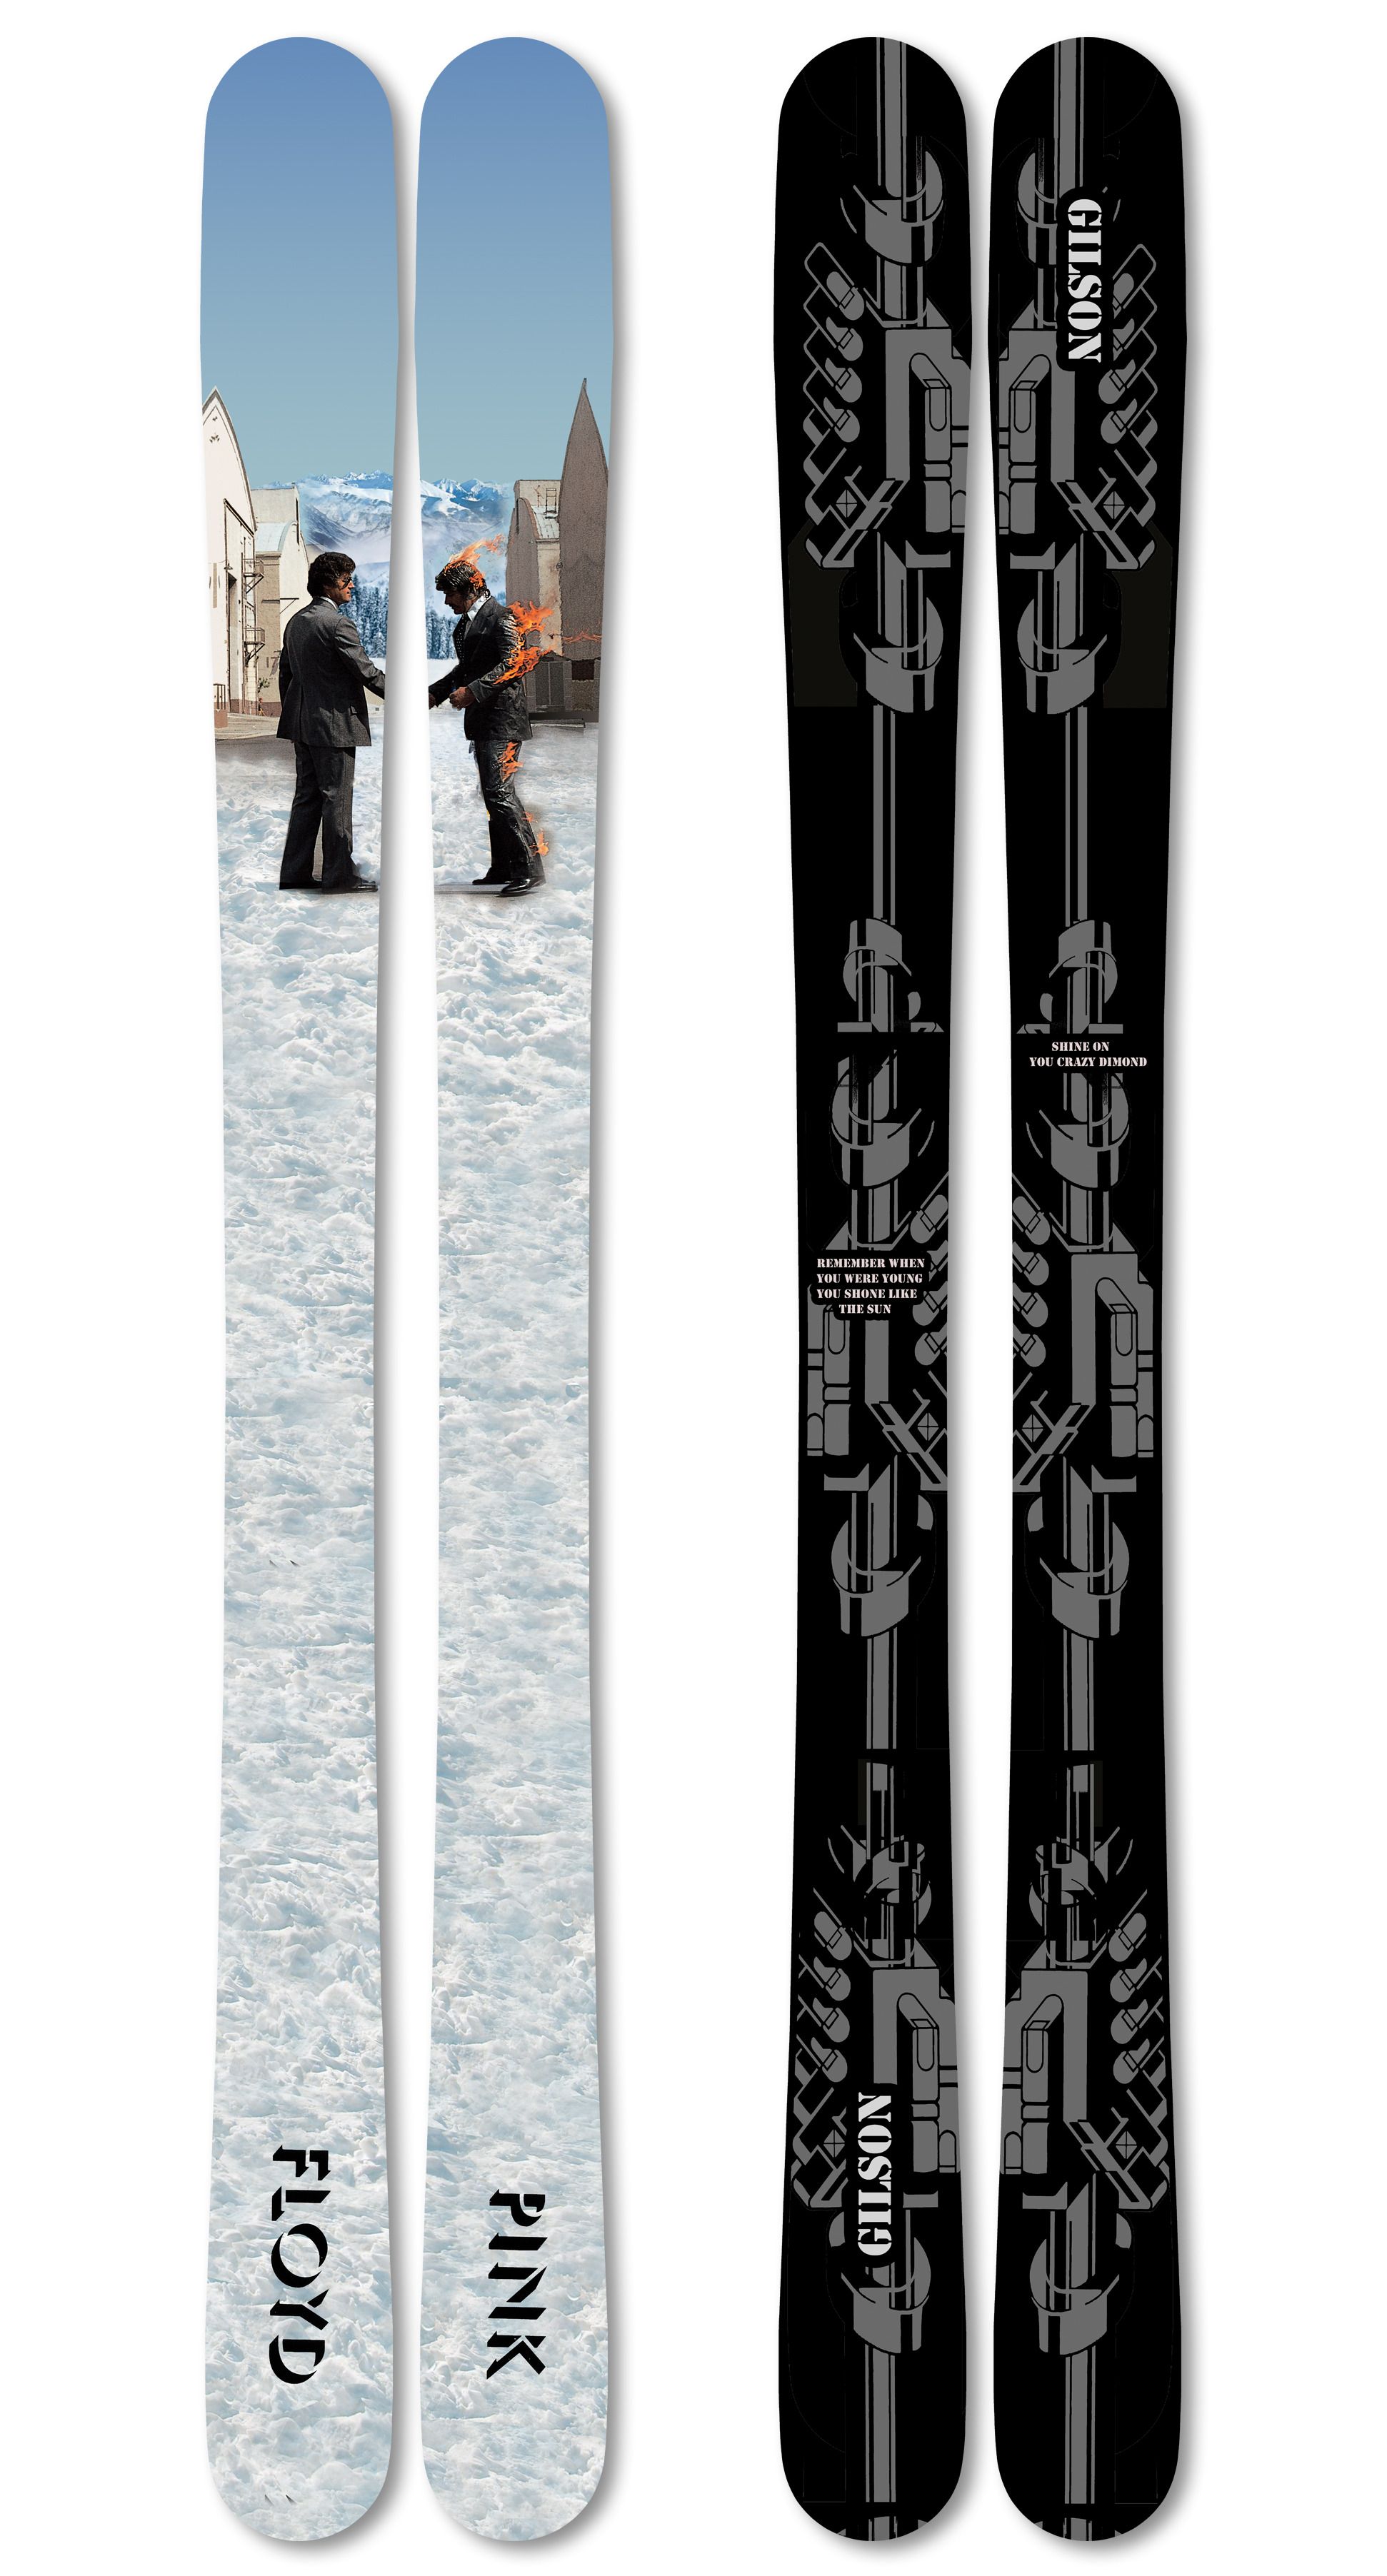 Pink floyd wish you were here skis large